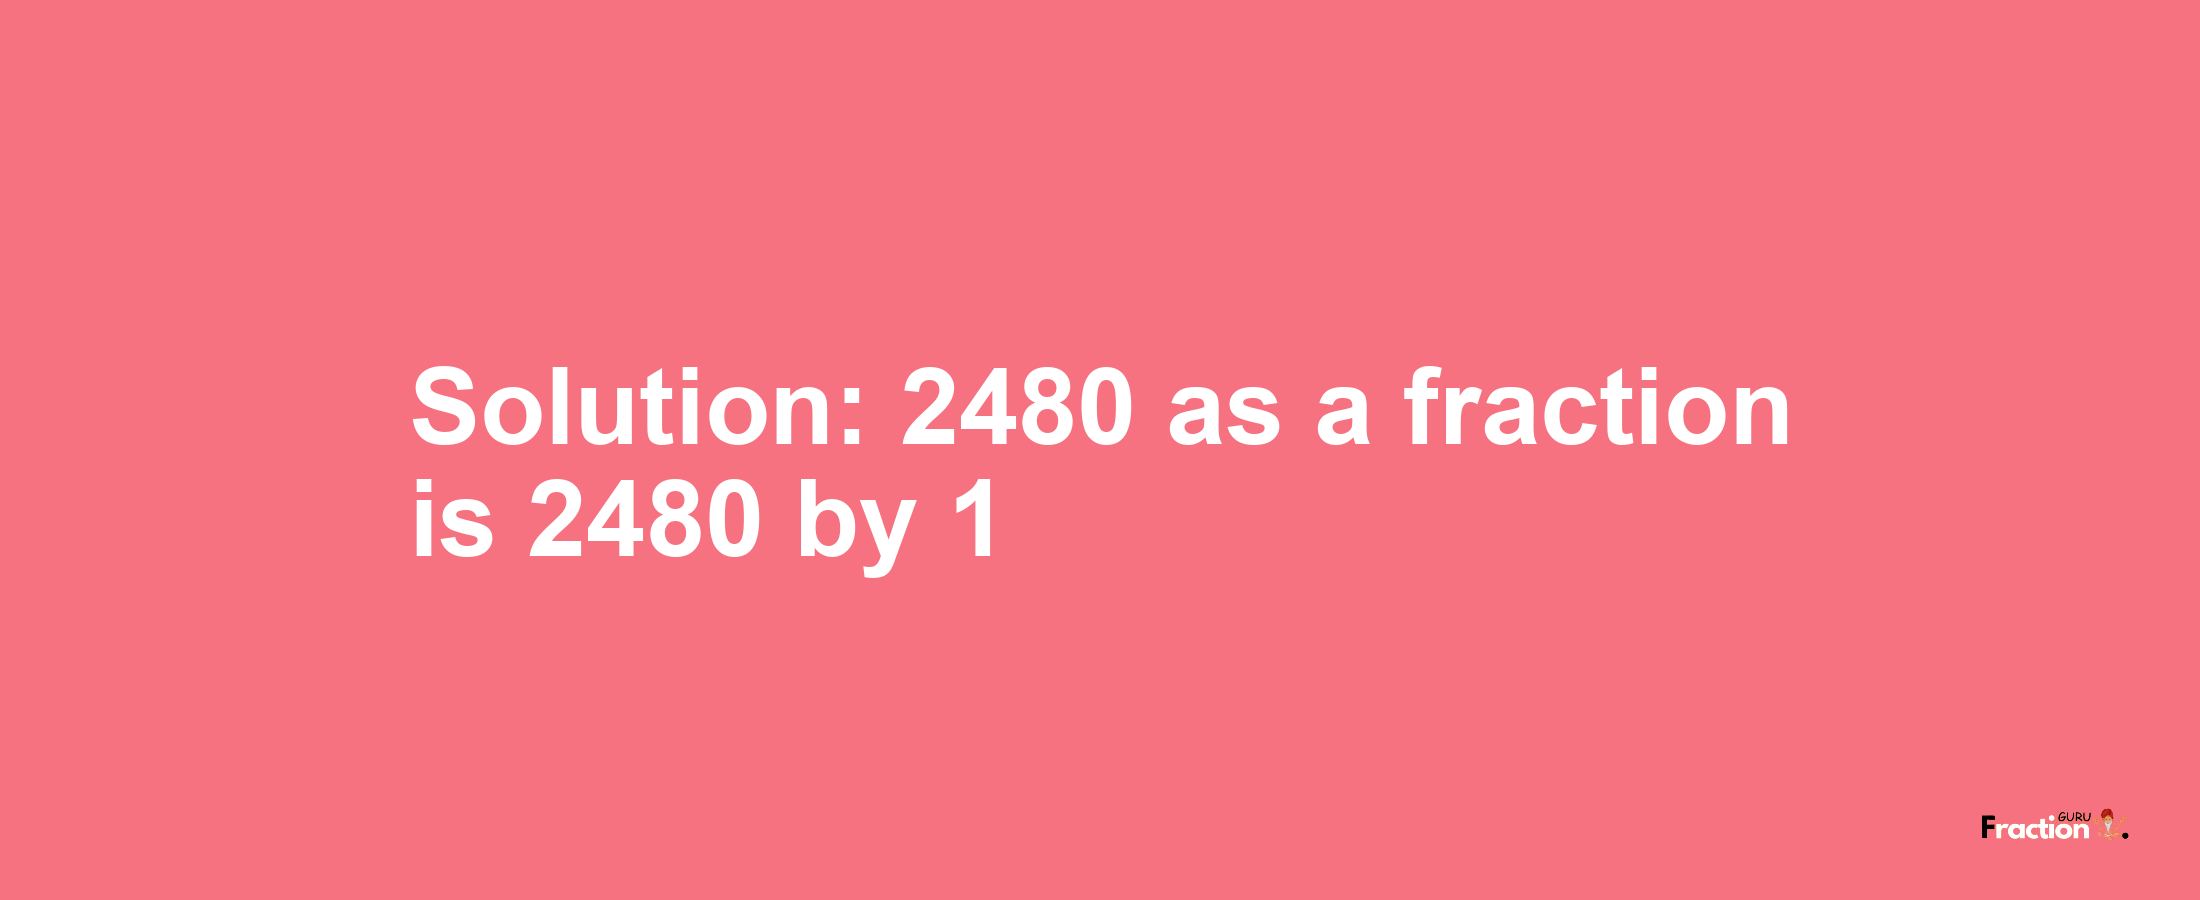 Solution:2480 as a fraction is 2480/1